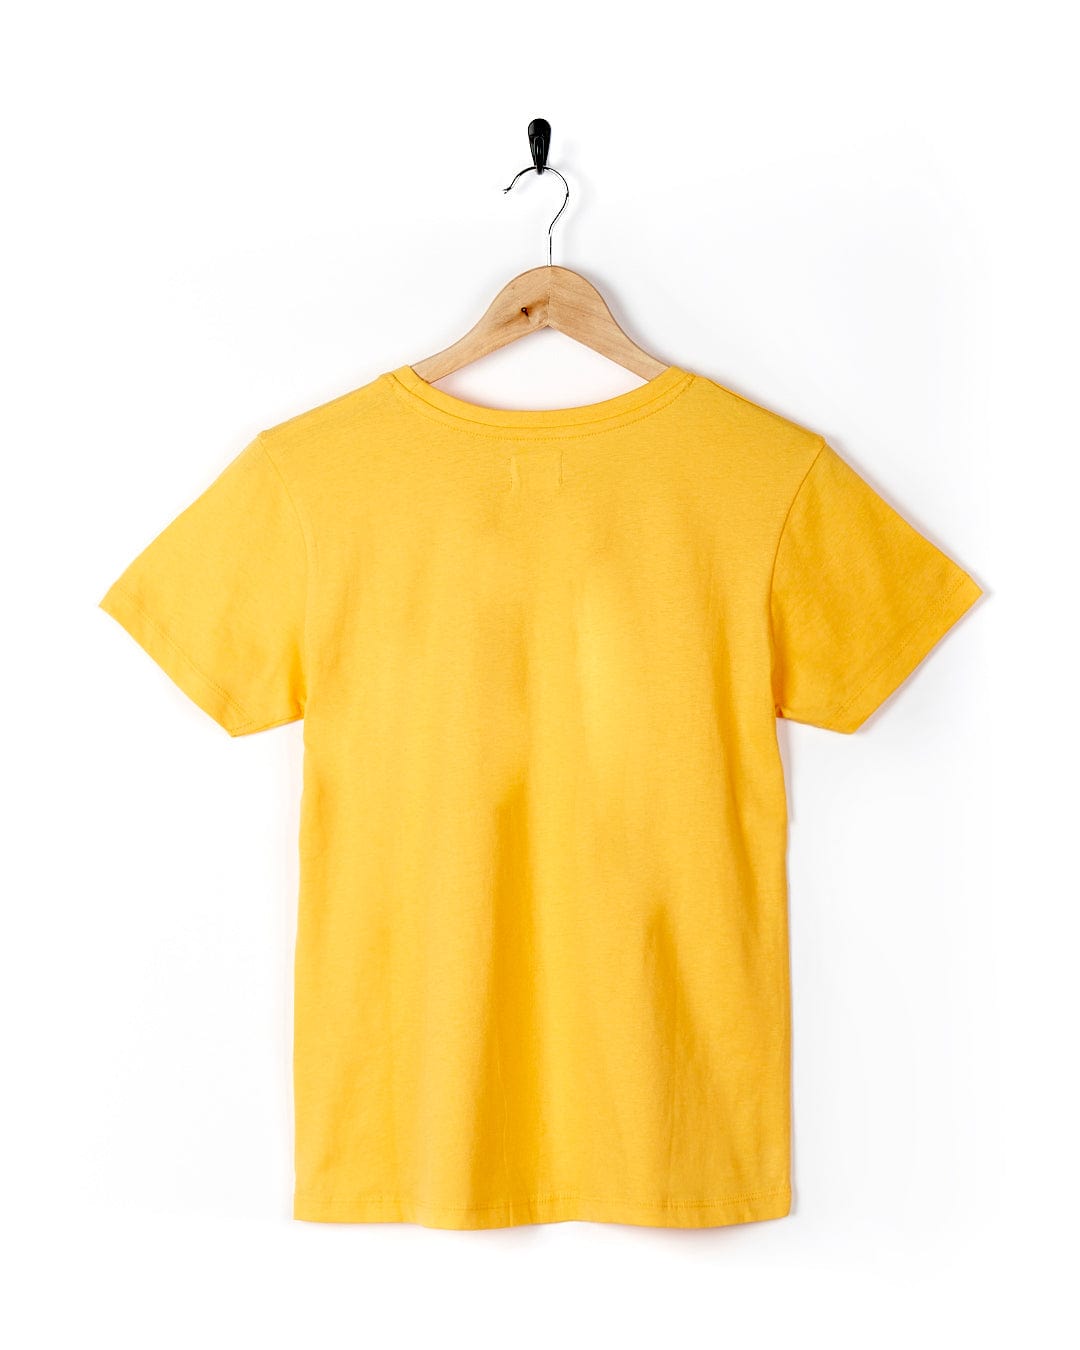 A Saltrock On The Road - Womens Short Sleeve T-Shirt - Yellow hanging on a wooden hanger.